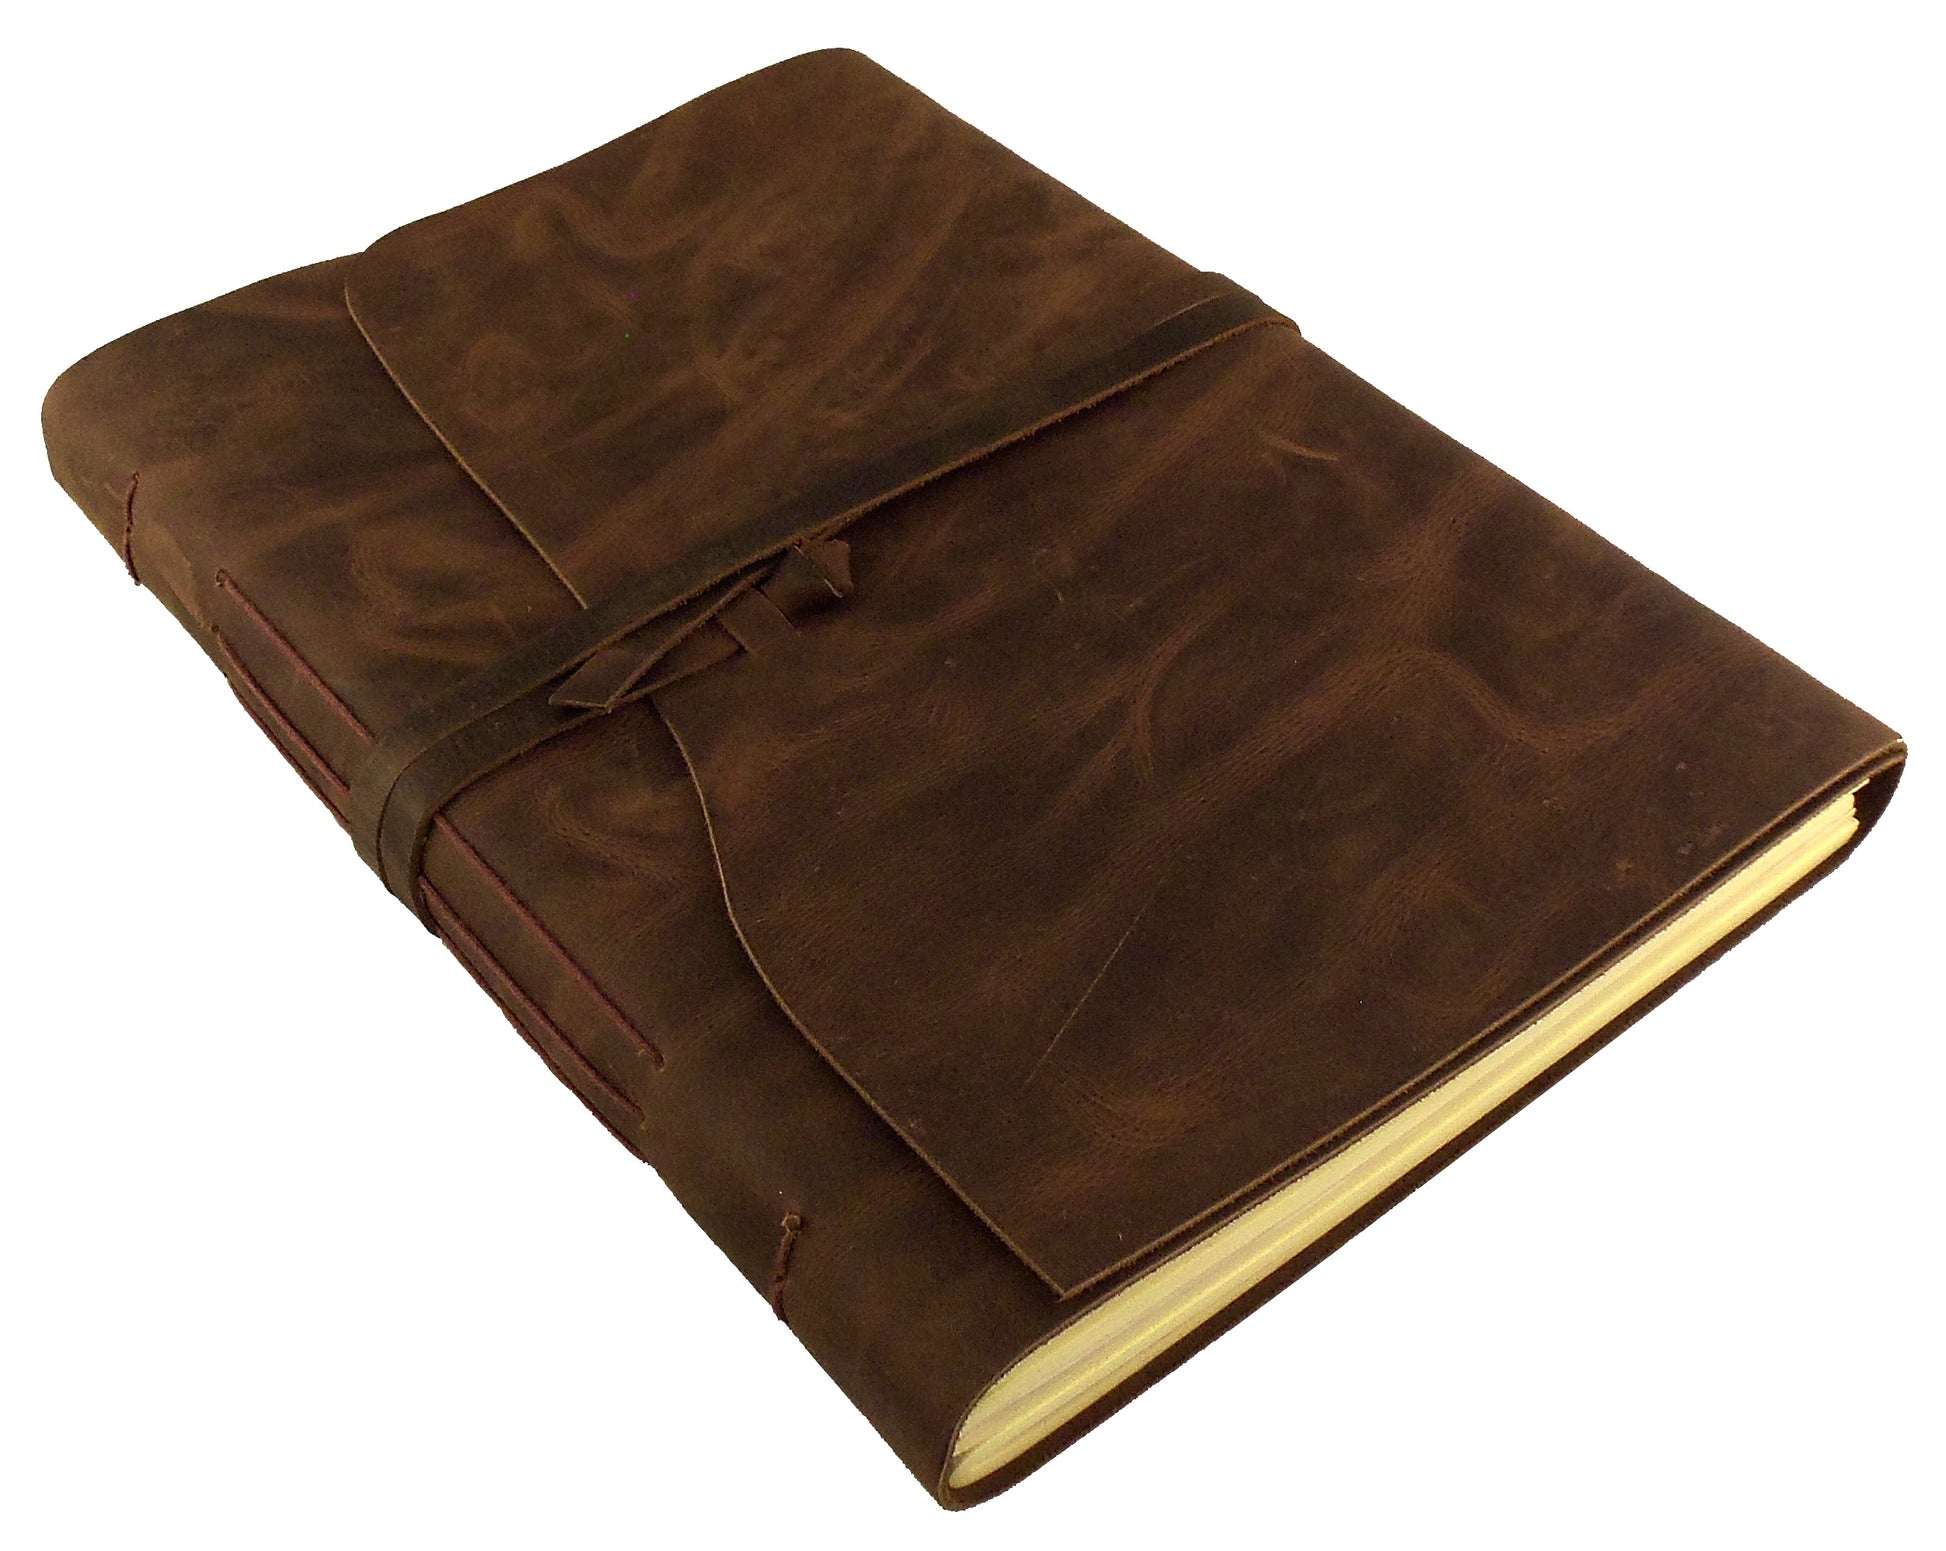 Sketch Book Cover, Leather Notebook Cover, Leather Book Cover